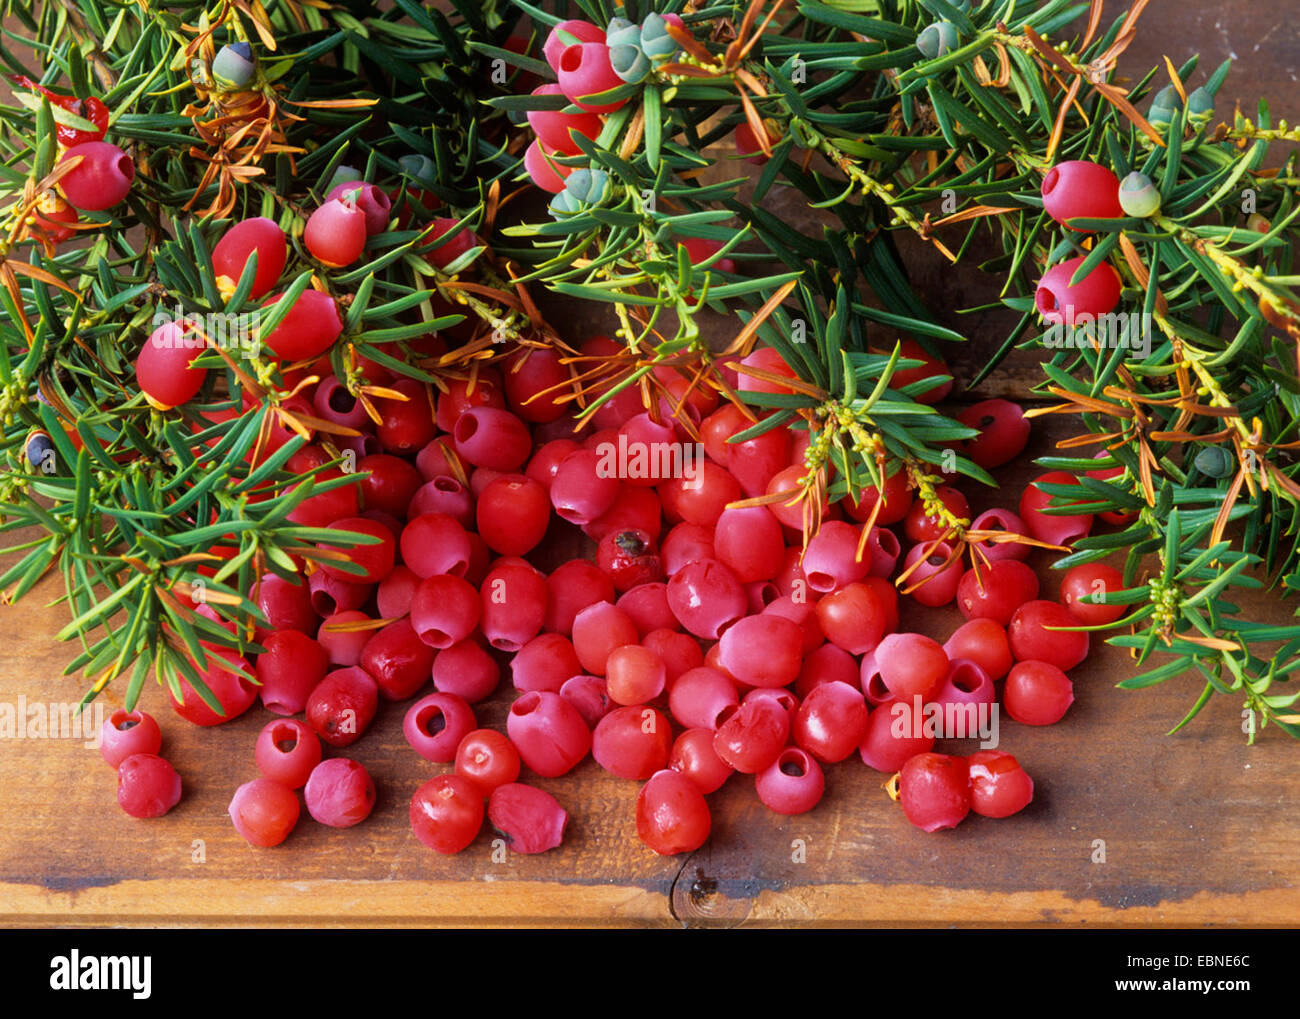 Common yew, English yew, European yew (Taxus baccata), seeds of yew with red aril, Germany Stock Photo